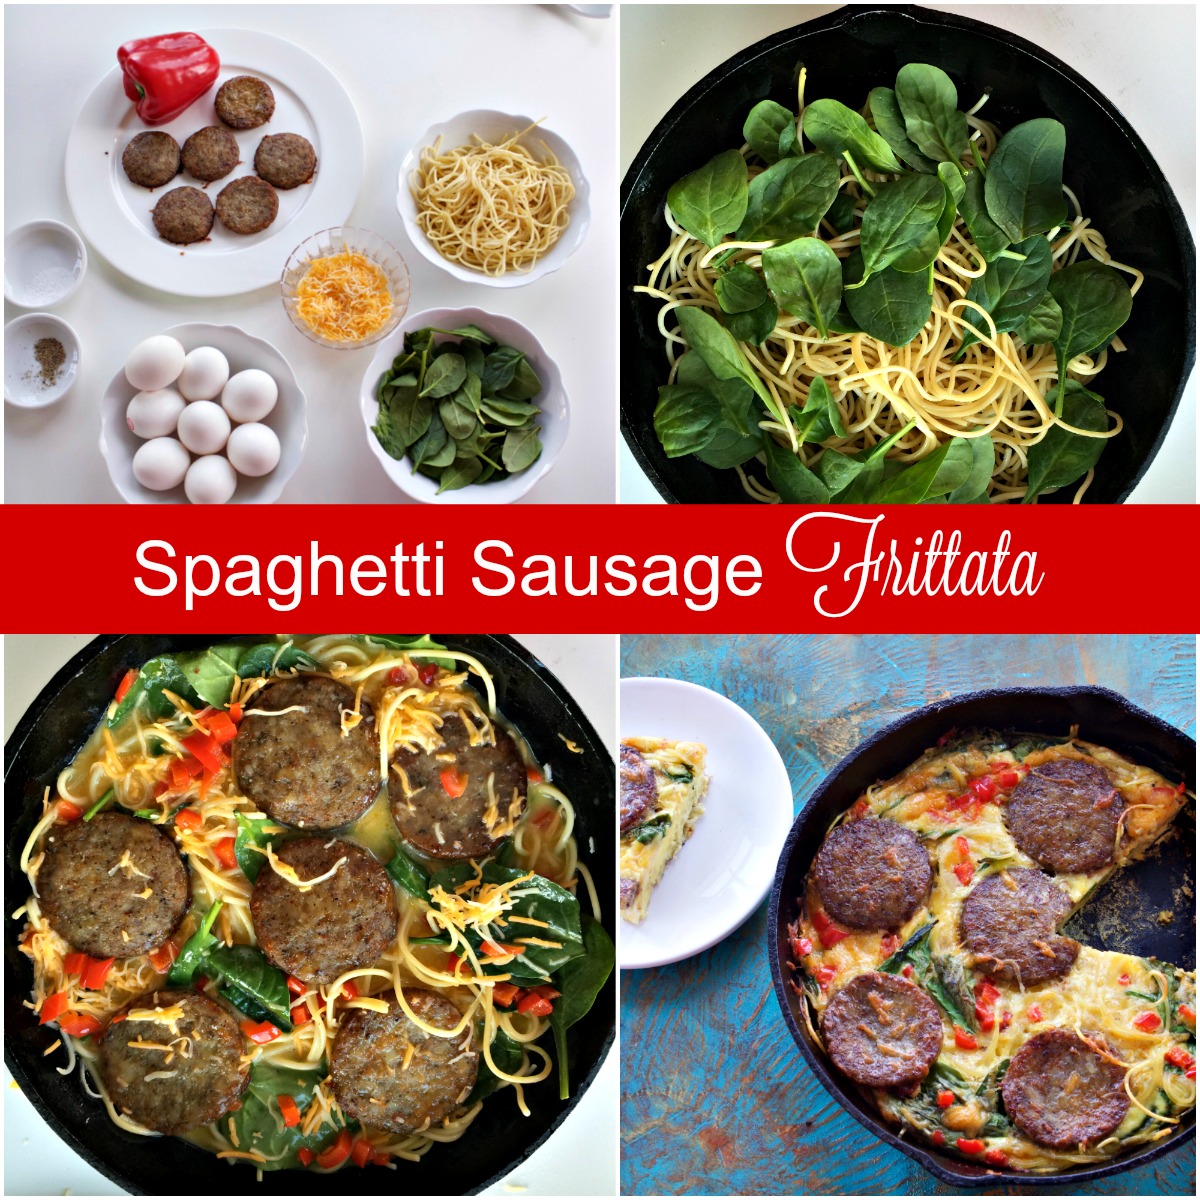 How to Make Sausage Spaghetti Frittata from Spinach Tiger